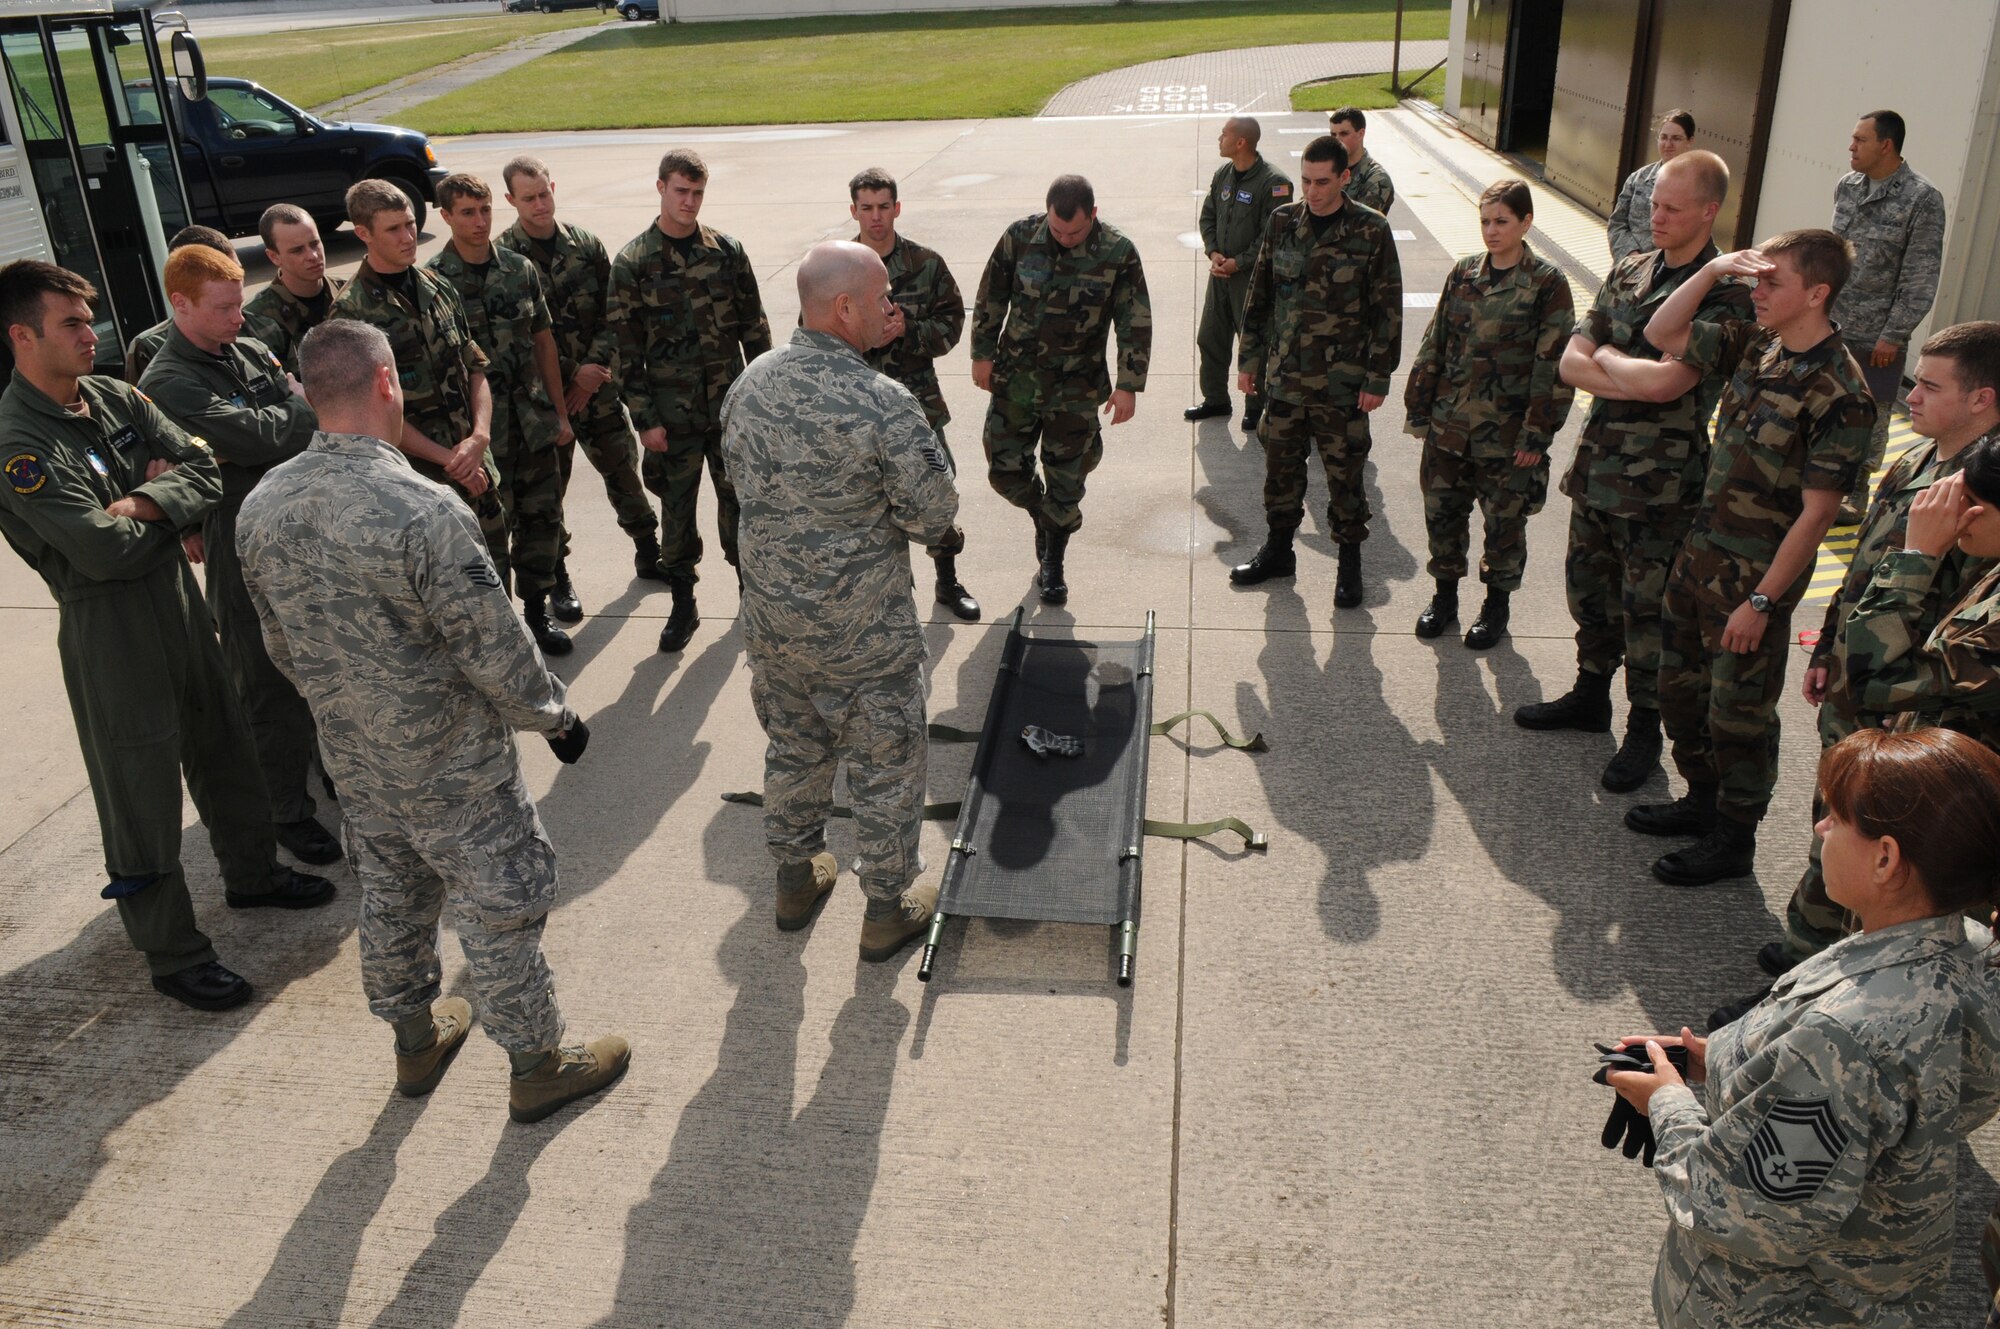 U.S. Air Force Tech. Sgt. Scott Davison, a Contingency Aeromedical Staging Facility medic, briefs U.S. Air Force Academy cadets on proper procedures of transporting patients using a litter, Ramstein Air Base, Germany, June 16, 2009.  The cadets are participating in Operation Air Force, a summer program which provides exposure to real-world Air Force base environments and prepares the cadets for the transition from academy life to active duty.  (U.S. Air Force photo by Staff Sgt. Chenzira Mallory)